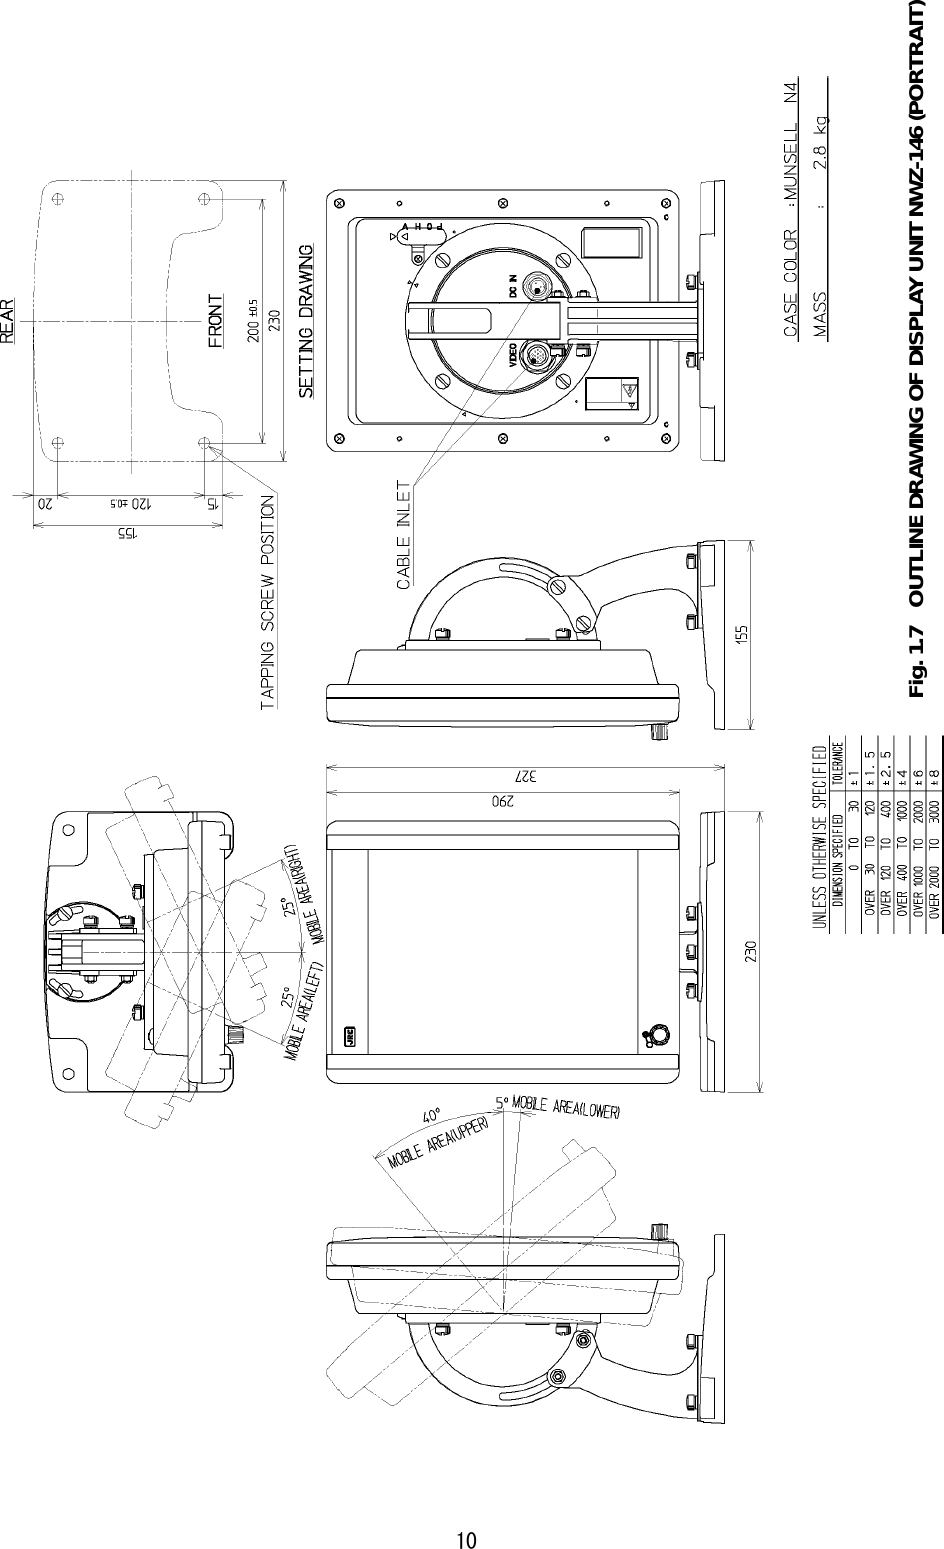   10  Fig. 1.7    OUTLINE DRAWING OF DISPLAY UNIT NWZ-146 (PORTRAIT)